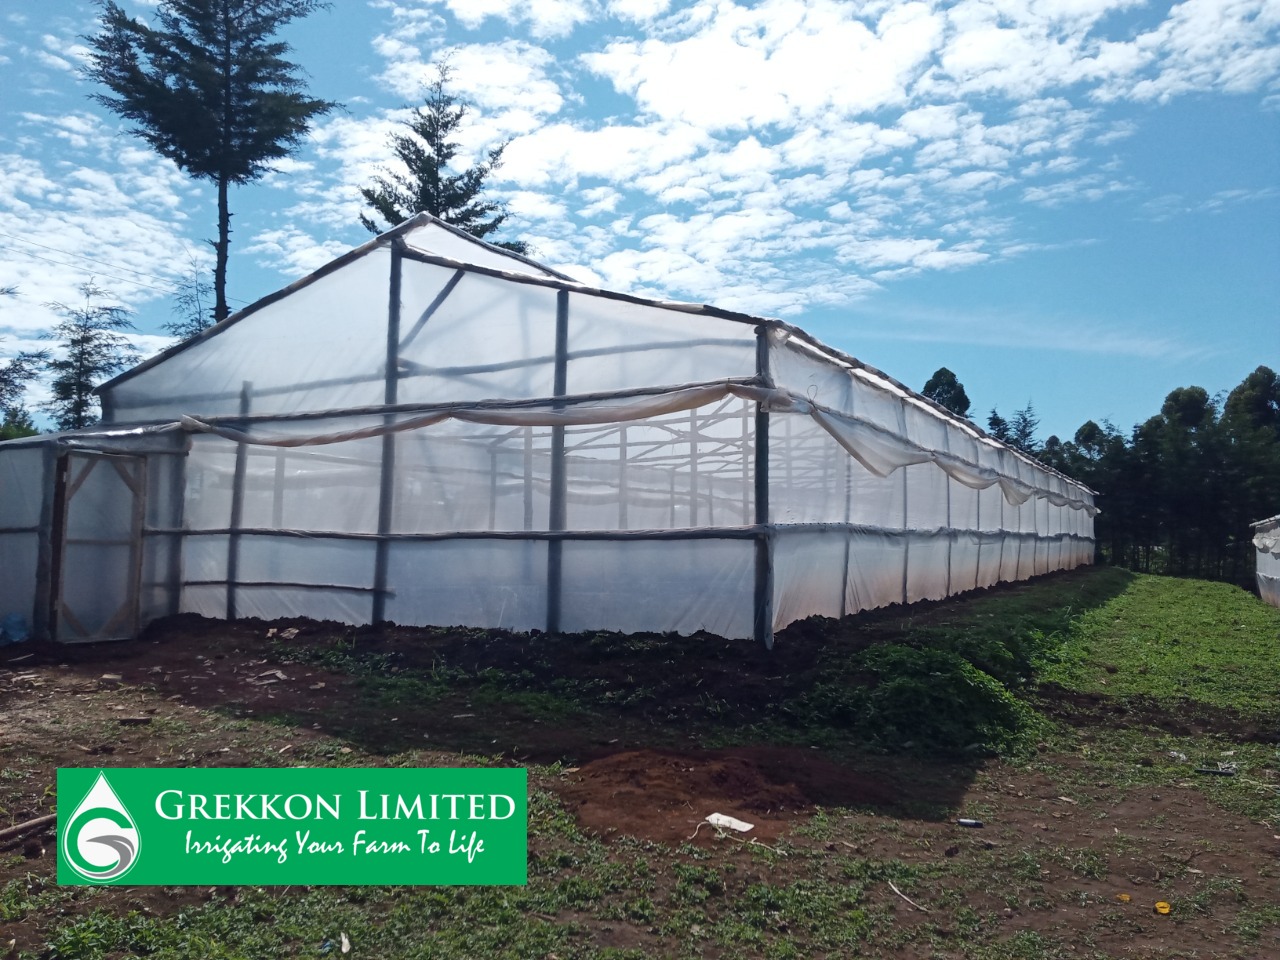 Greenhouse cost and sizes in Kenya